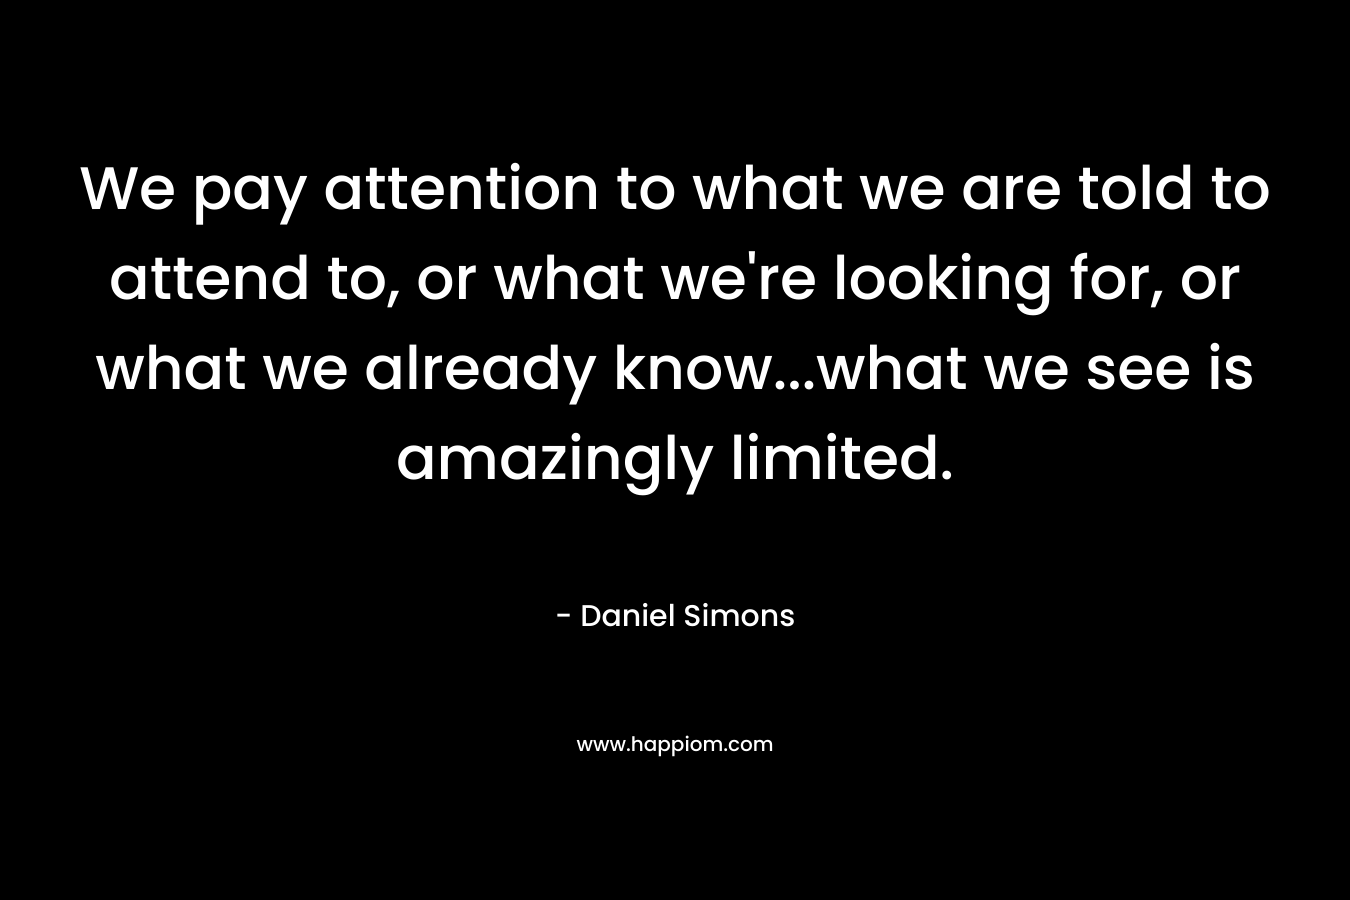 We pay attention to what we are told to attend to, or what we’re looking for, or what we already know…what we see is amazingly limited. – Daniel Simons